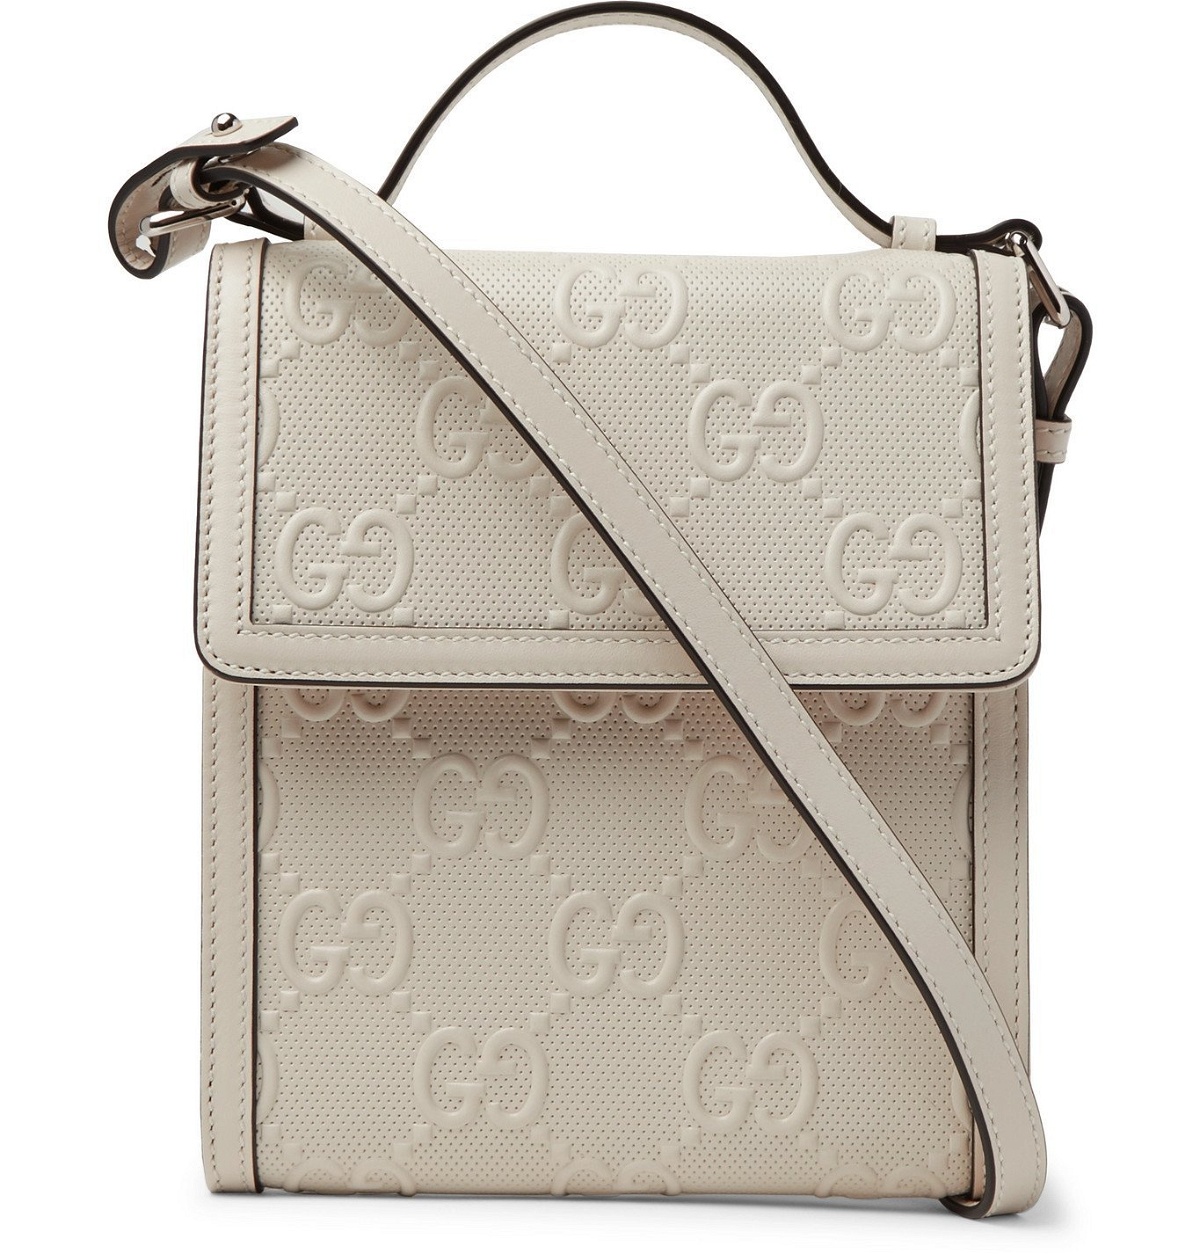 GUCCI - Logo-Embossed Perforated-Leather Messenger Bag - Neutrals